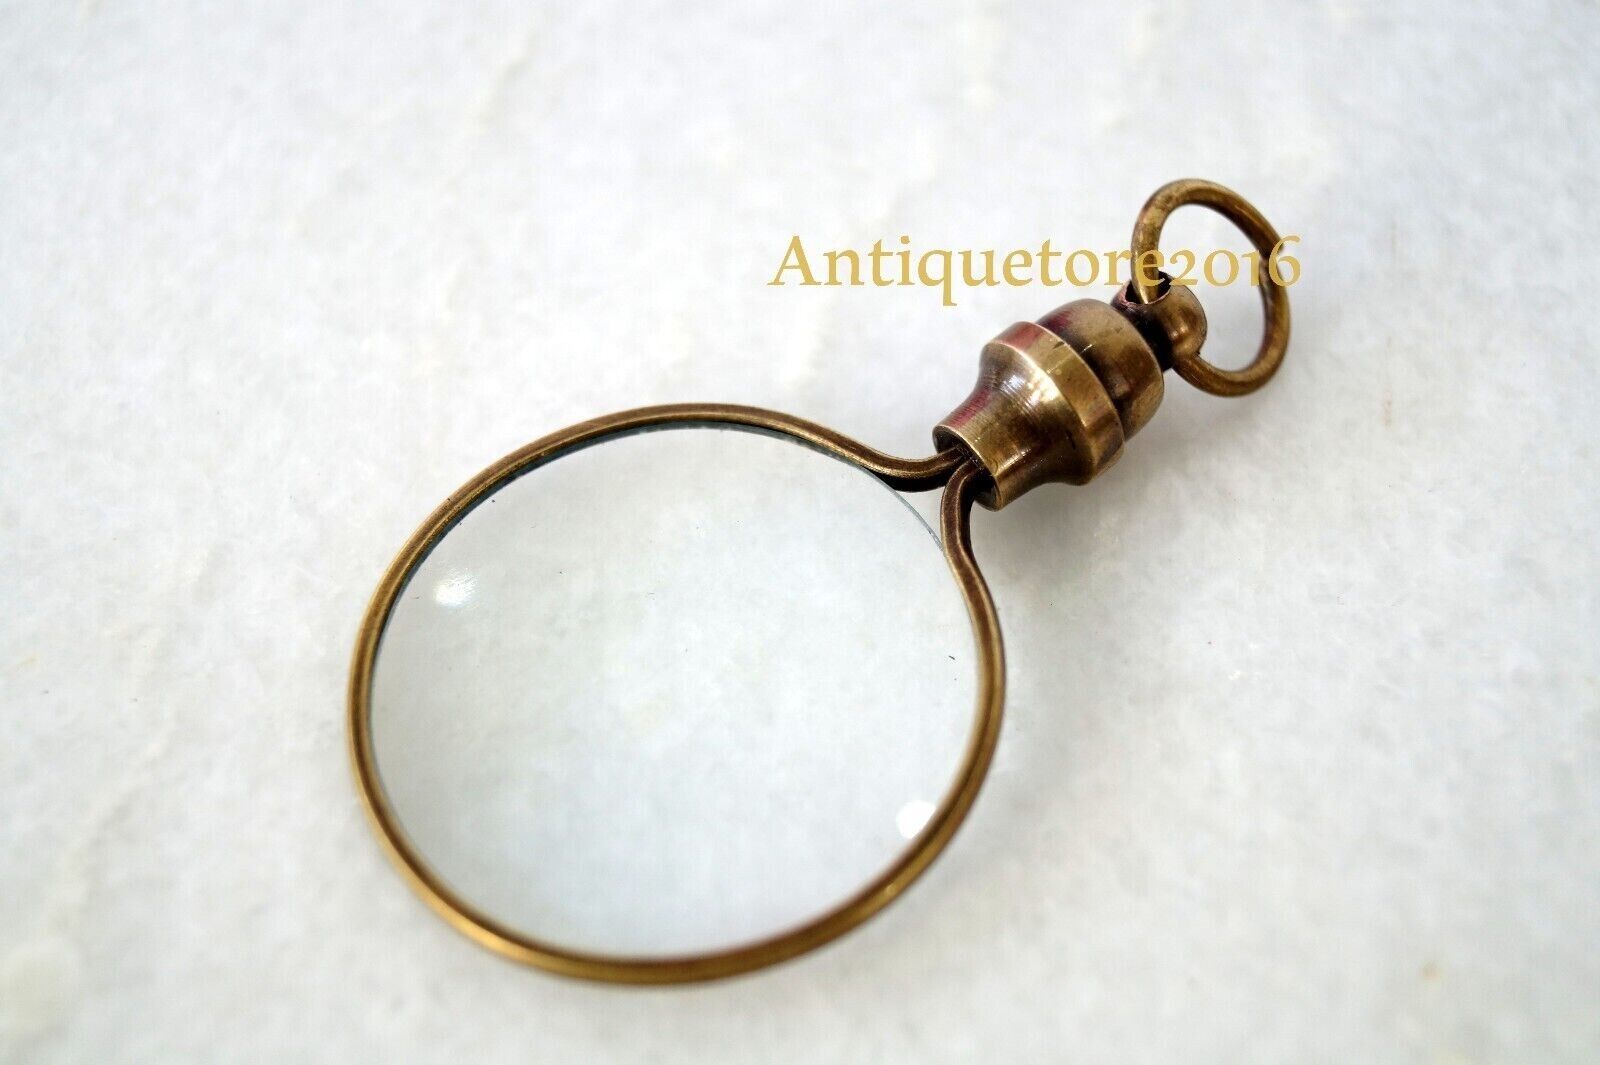 VINTAGE ANTIQUE TONE ON BRASS HIGH QUALITY GLASS HAND HELD MINI MAGNIFYING GLASS